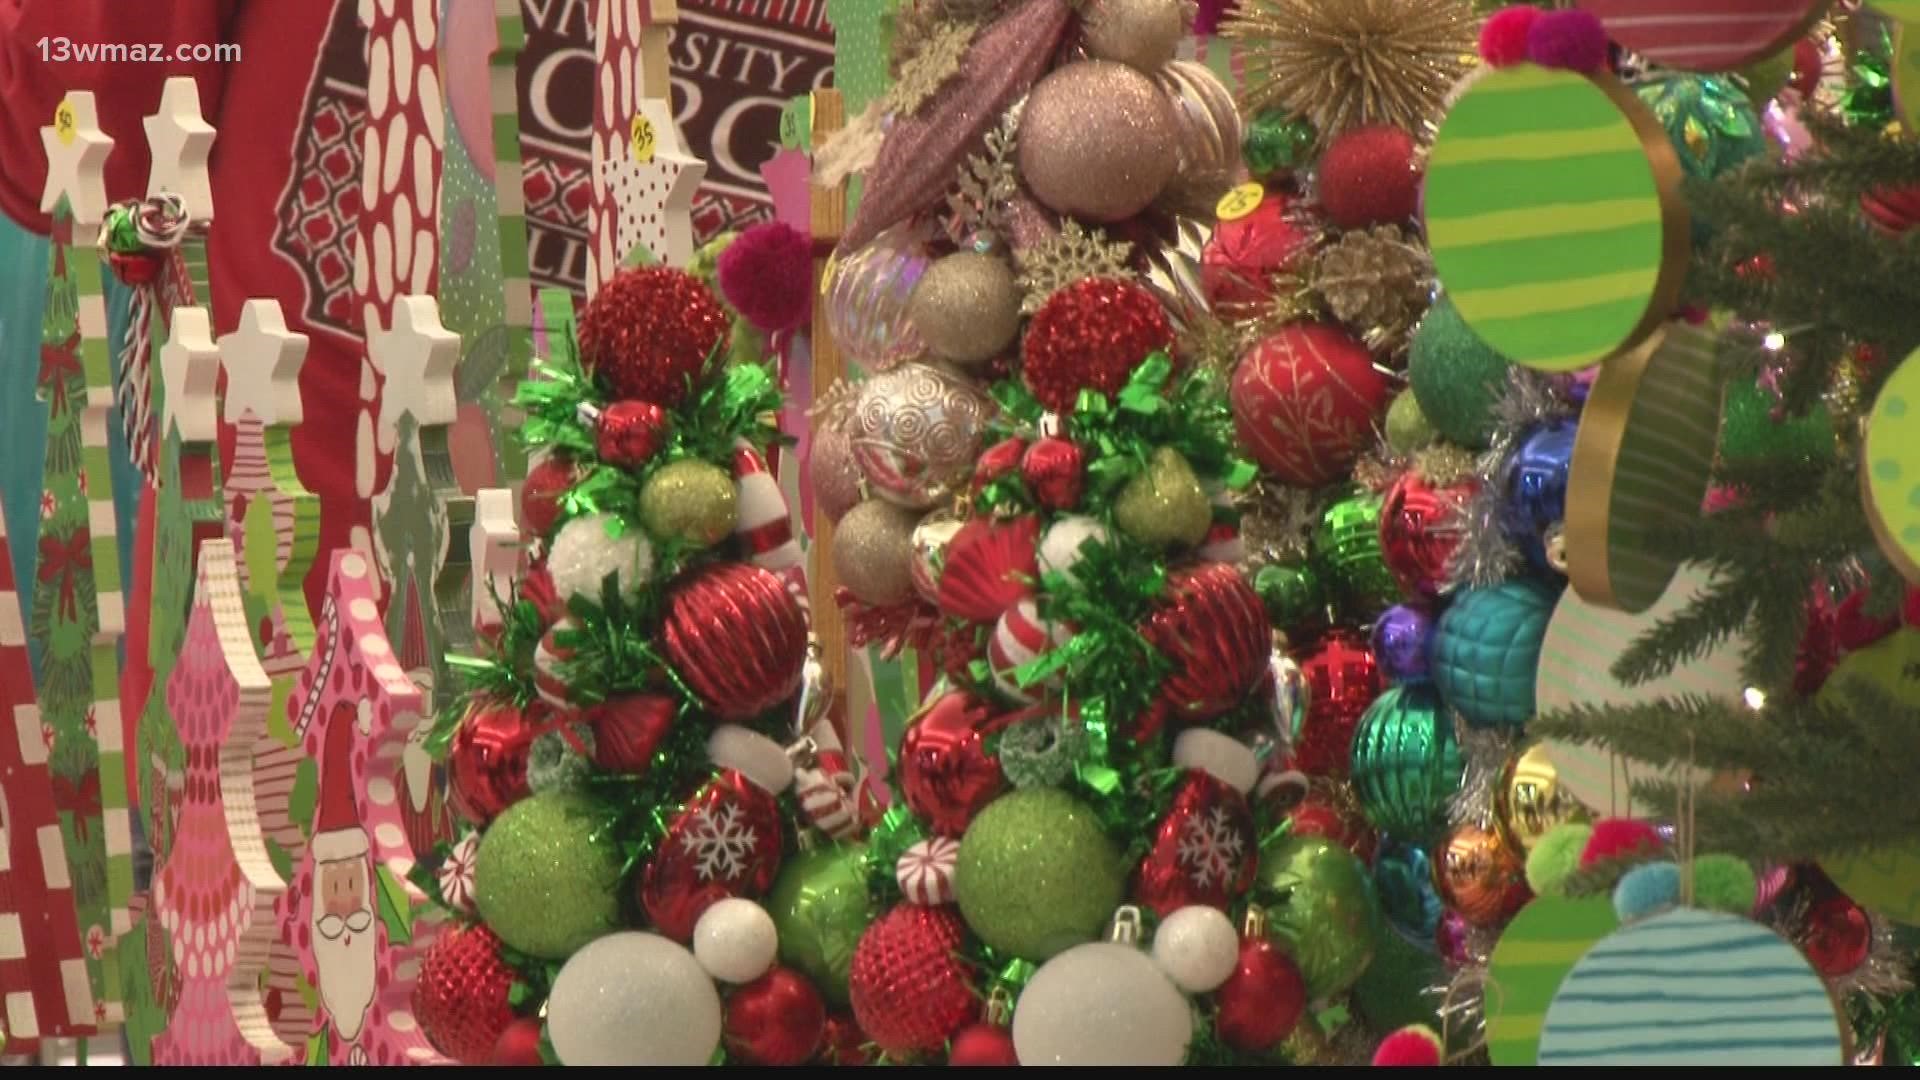 You can jump around like a happy elf and shop at the Mistletoe Market all weekend at the Georgia National Fairgrounds and Agricenter in Perry.